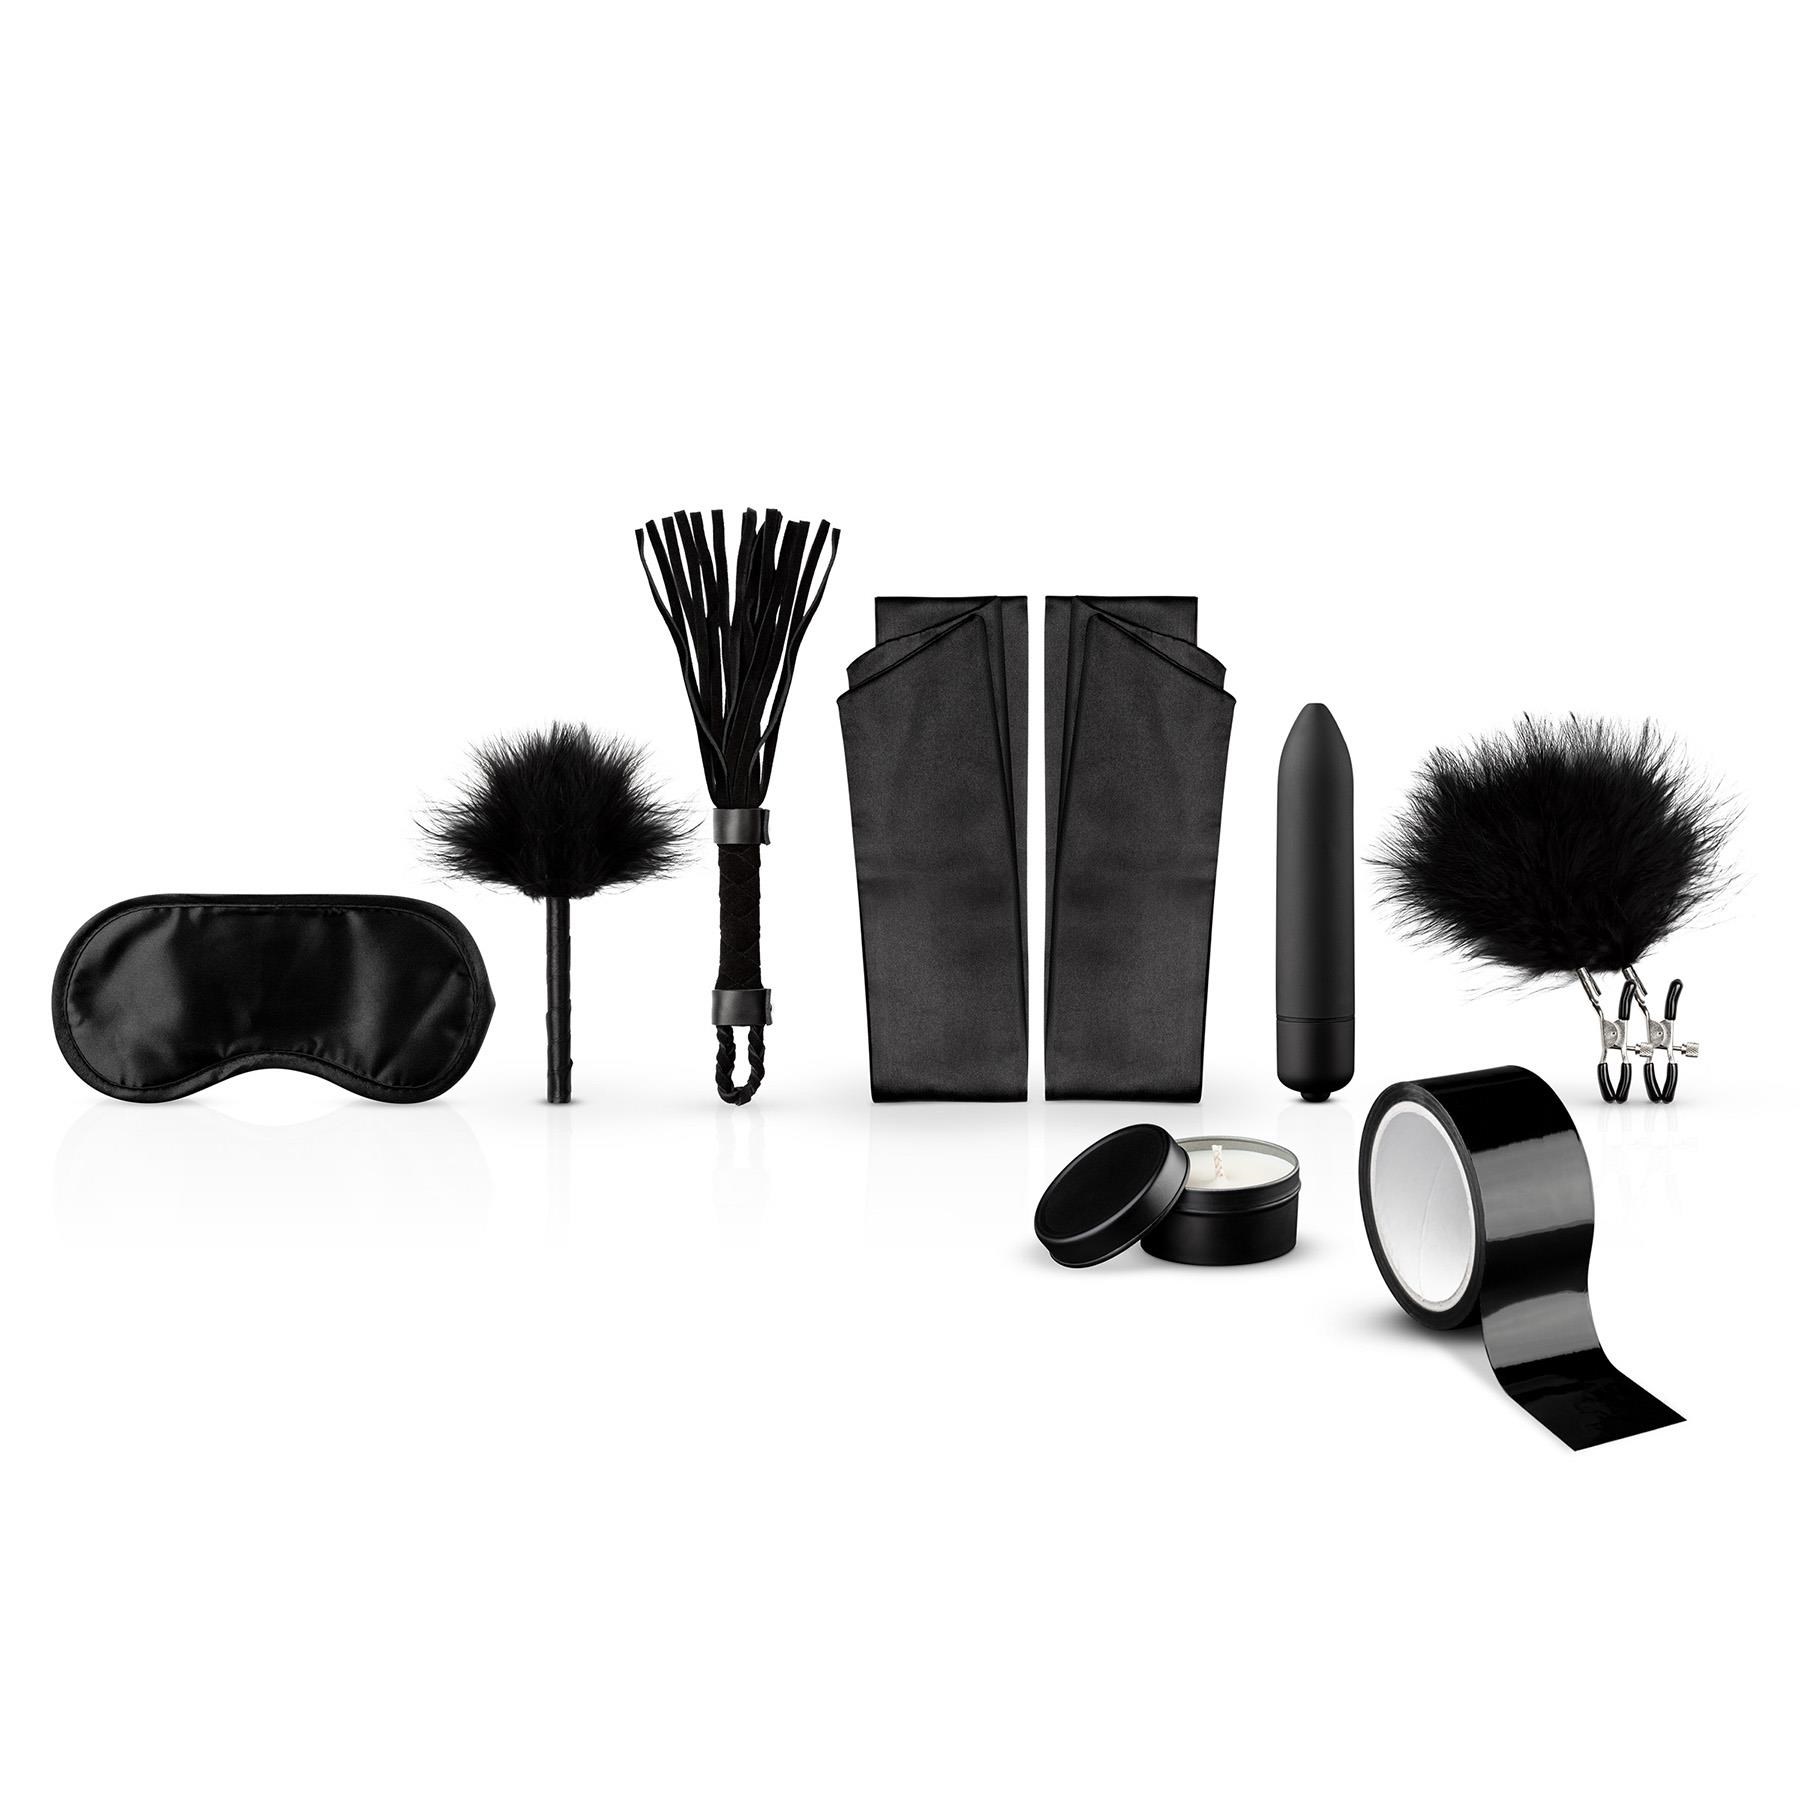 LoveBoxxx First Kinky Experience Starter Set - All Components